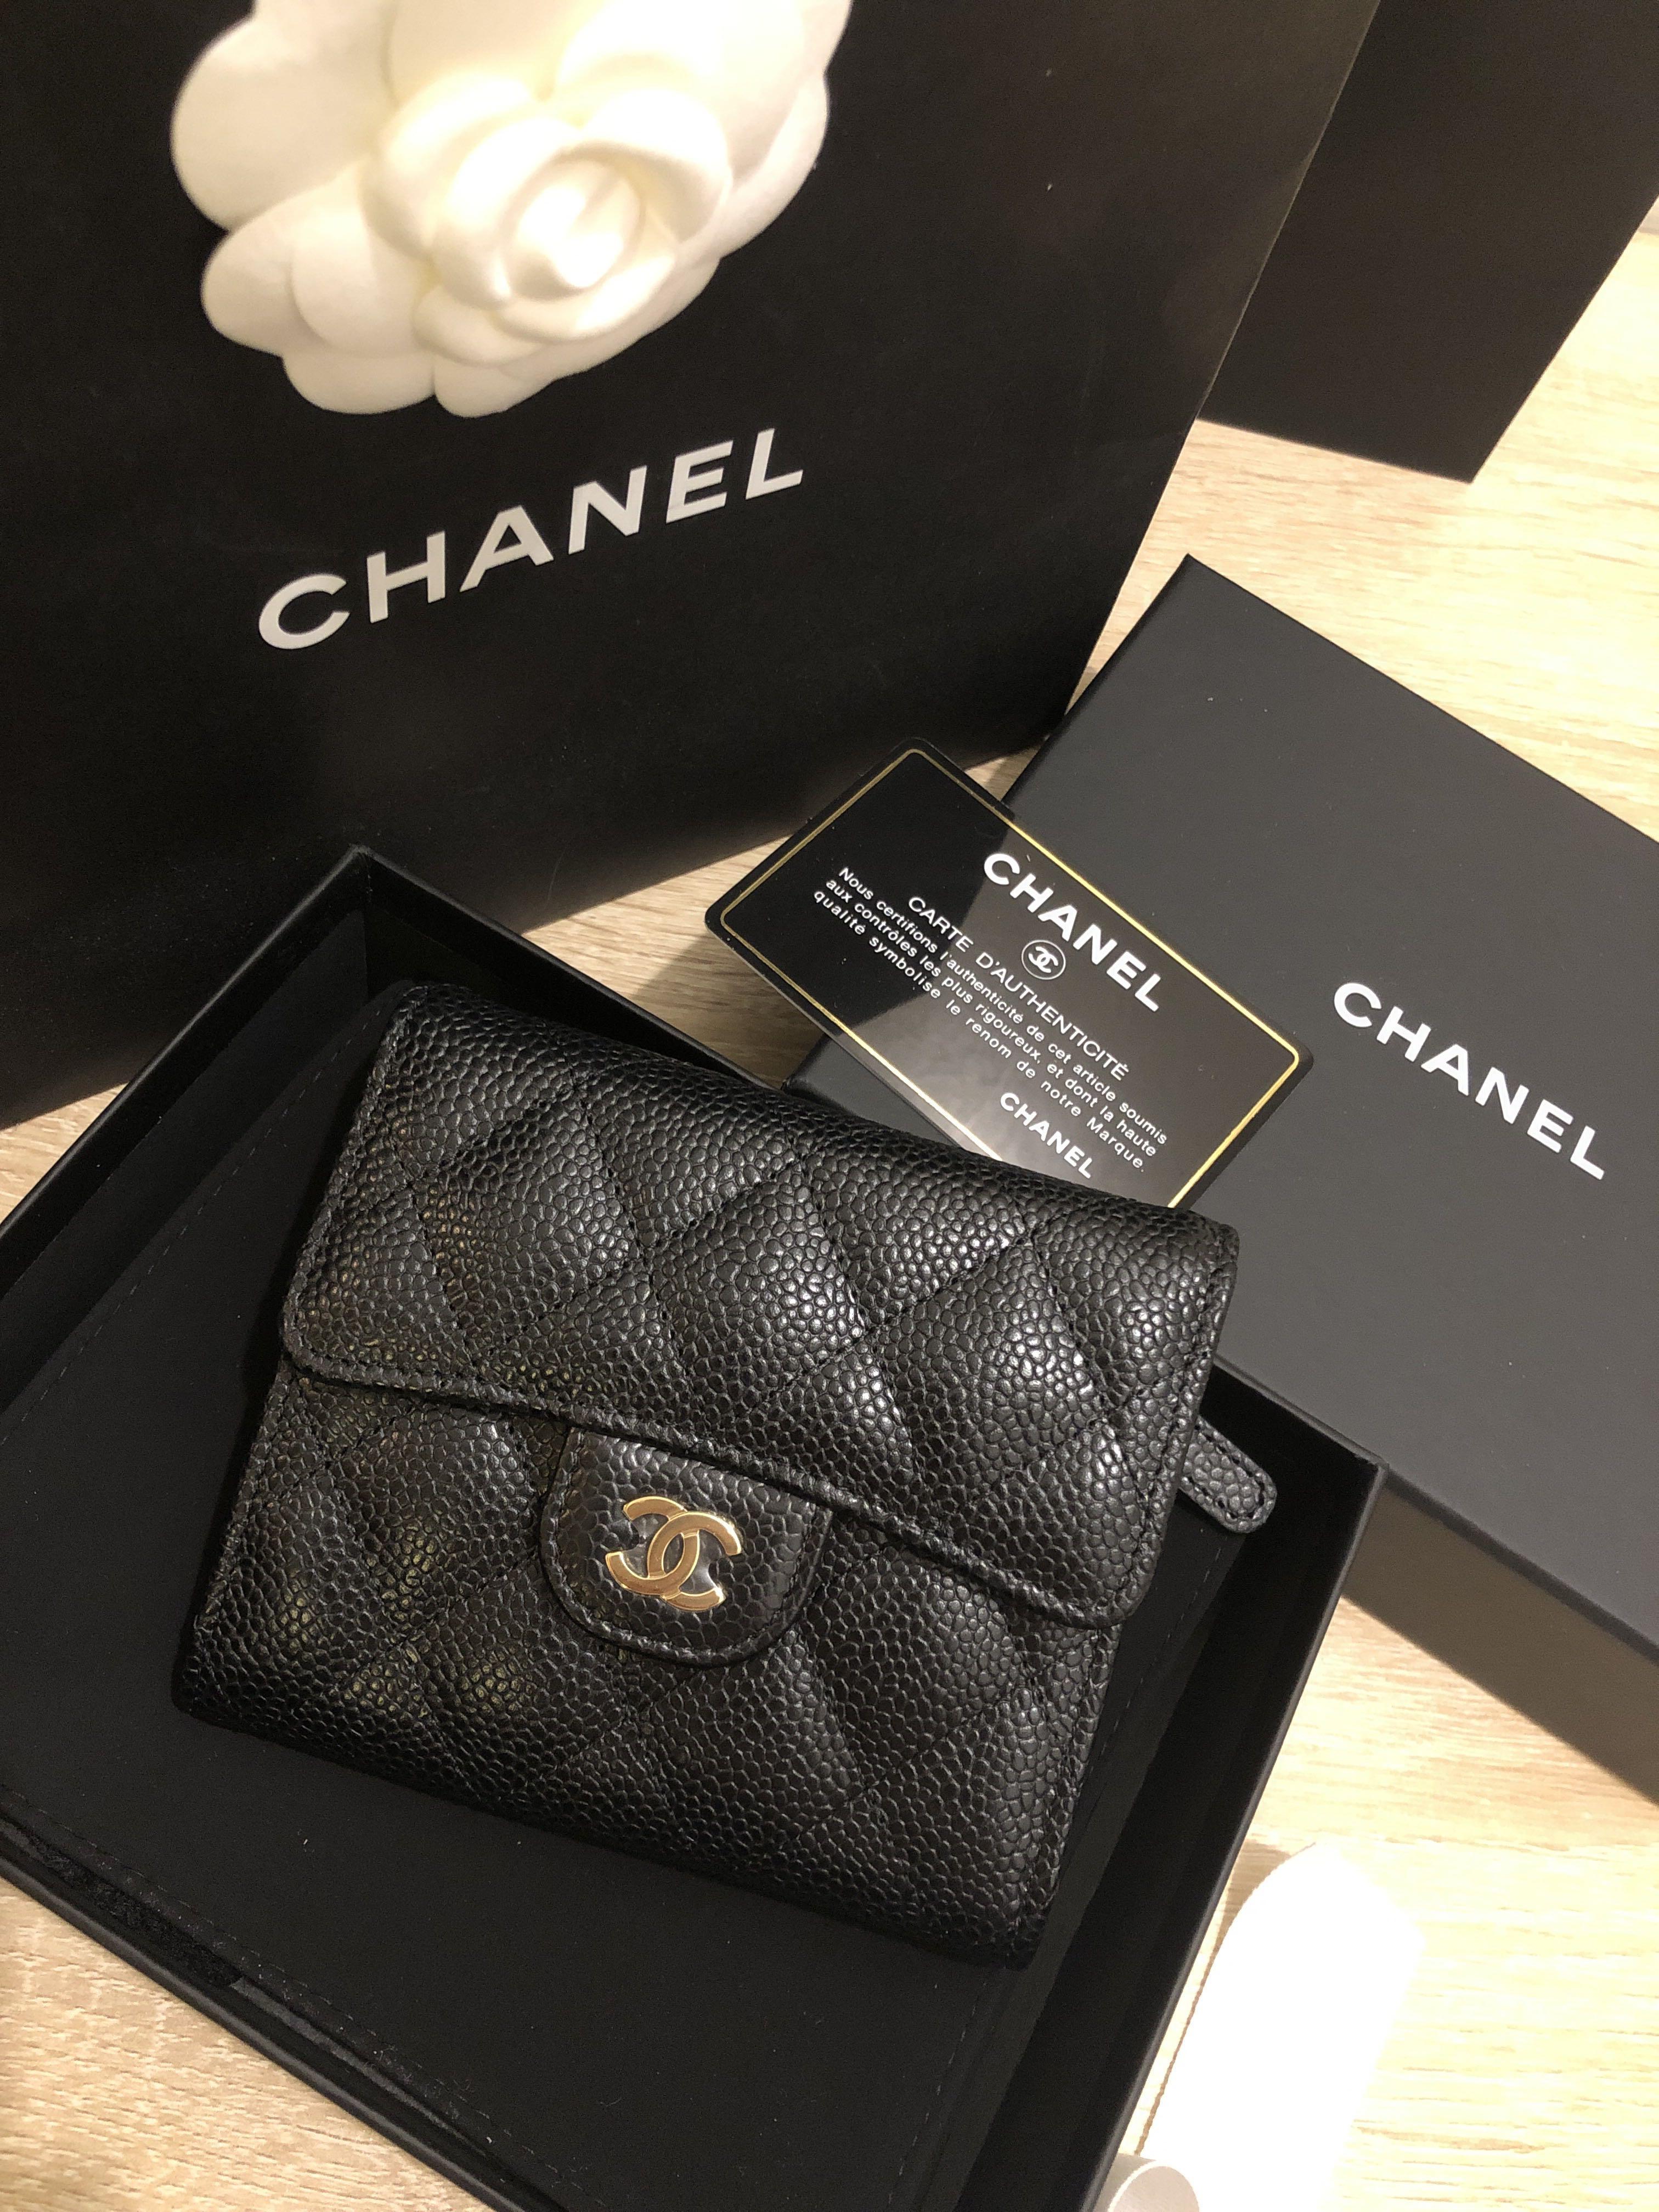 Chanel Small classic flap Wallet- brand new